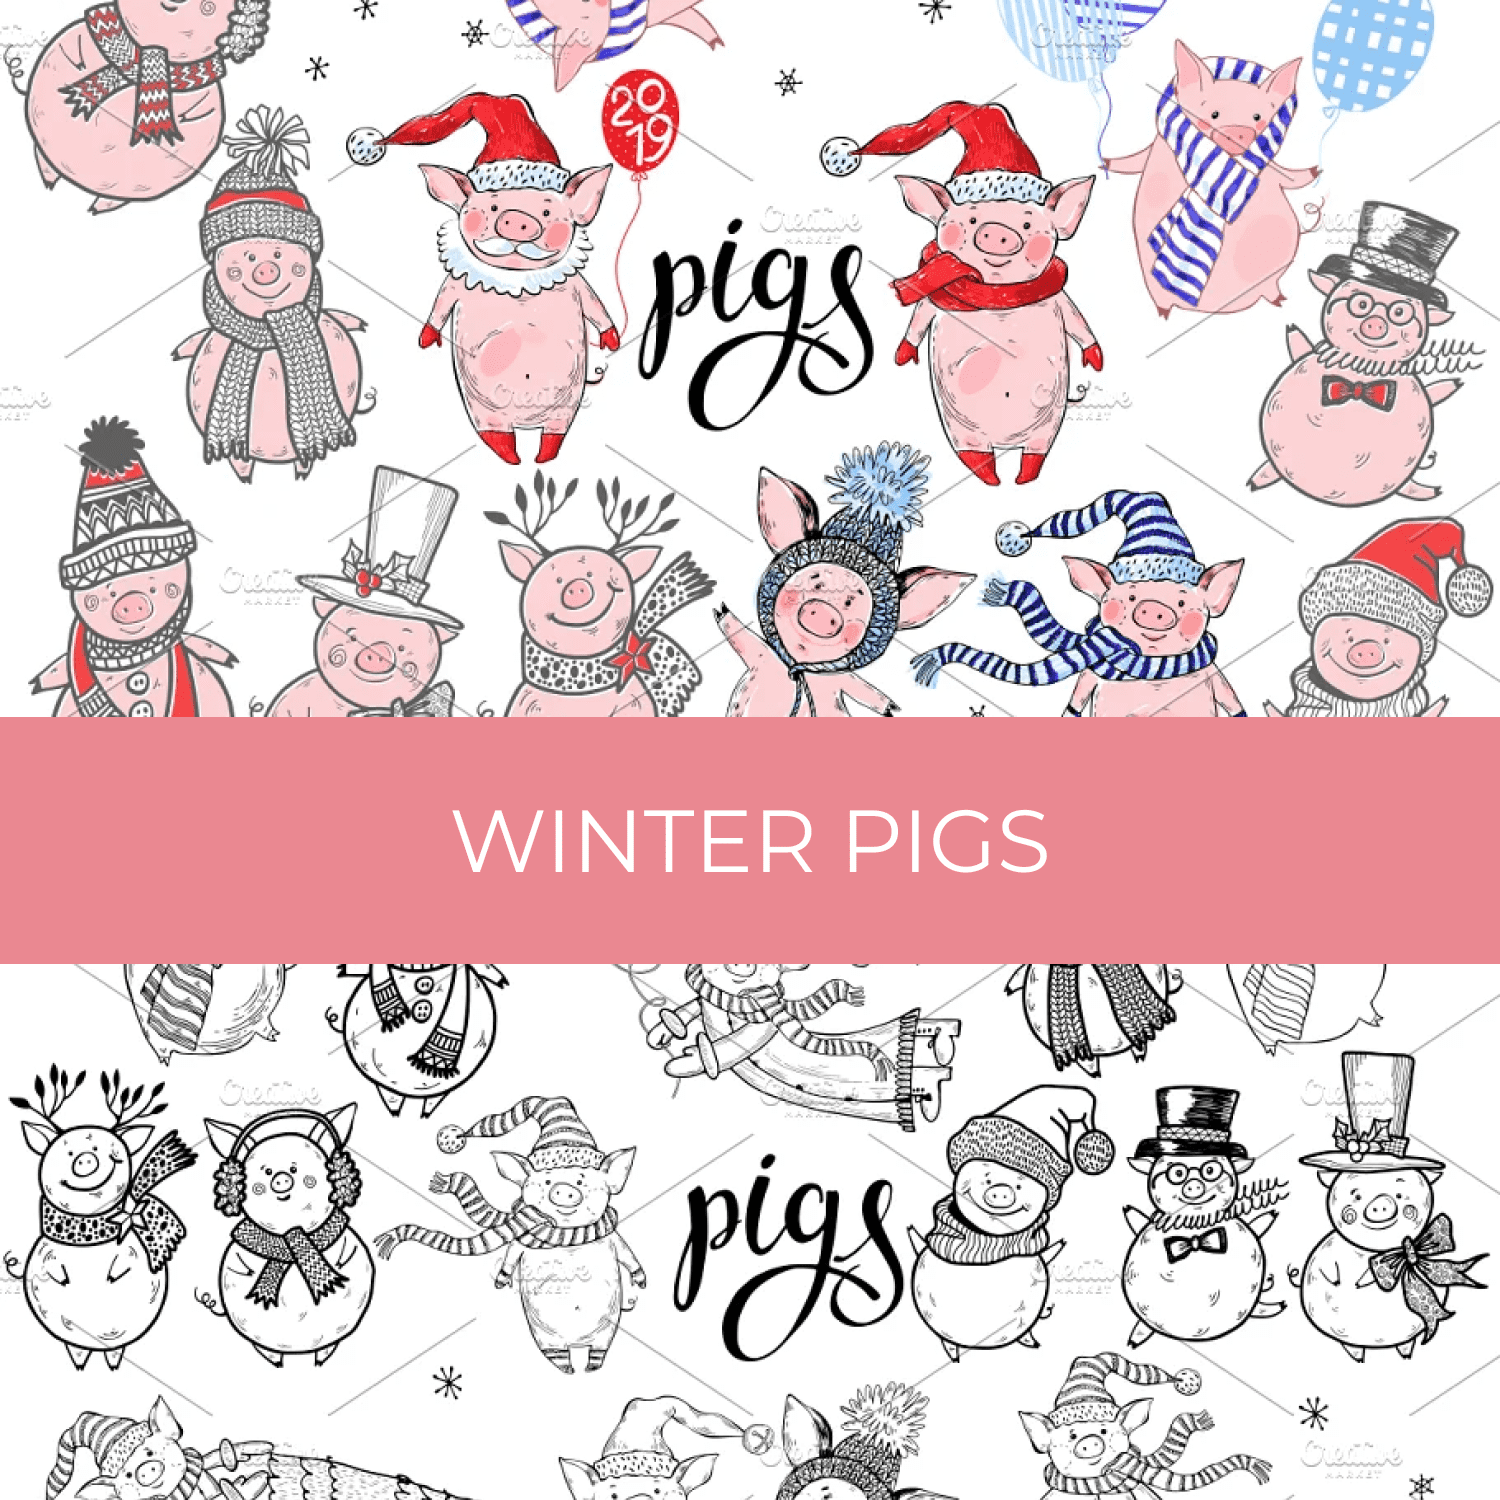 Winter pigs cover.